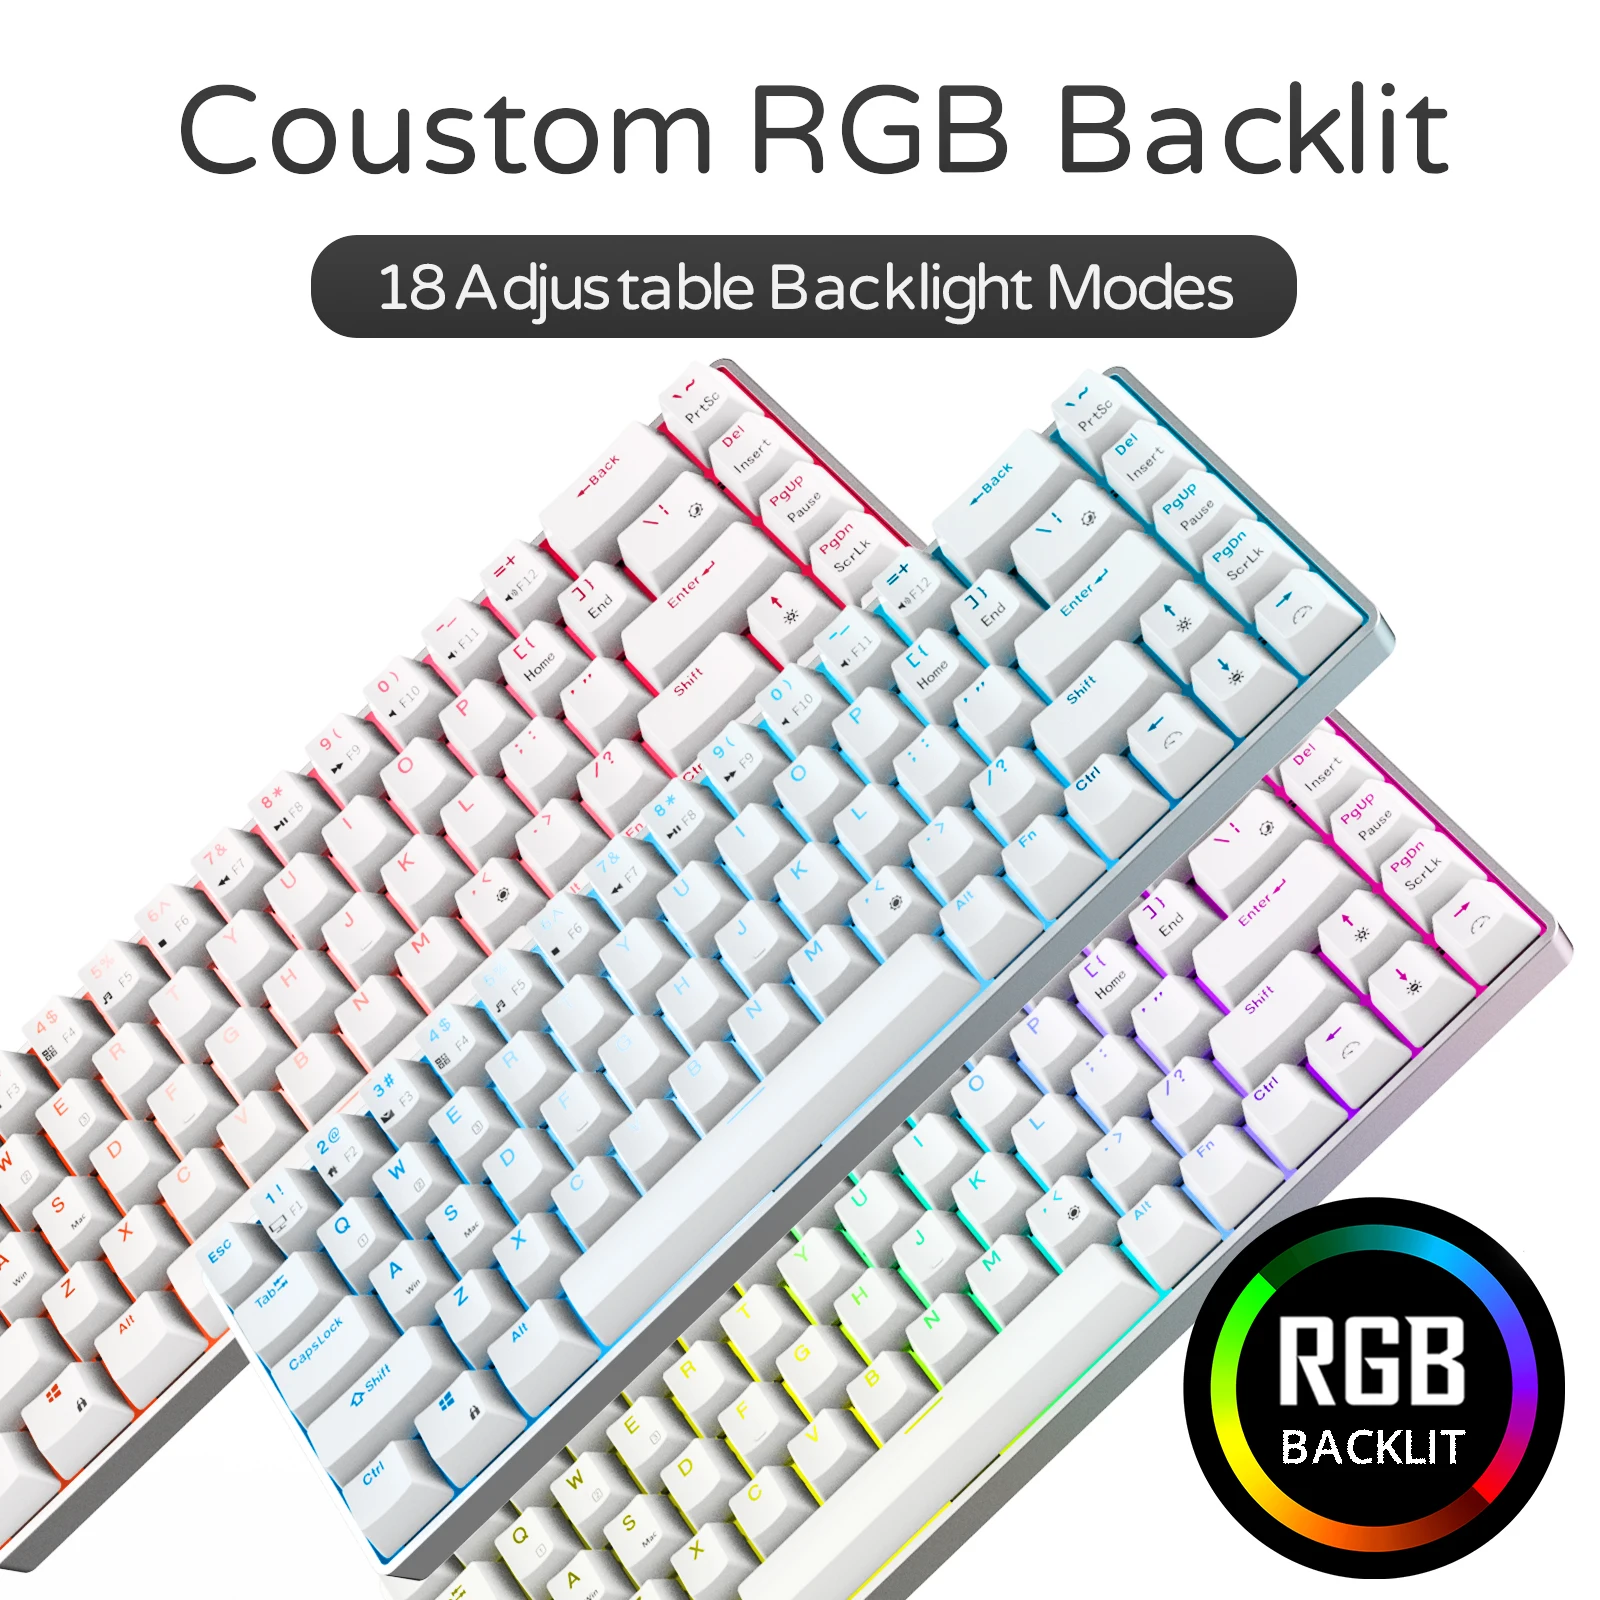 RK68 Pro RGB Backlit Hot-swap Mechanical Keyboard, 2.4Ghz Wireless/Bluetooth/Wired Gateron Switch Gaming Keyboard with CNC Case enlarge